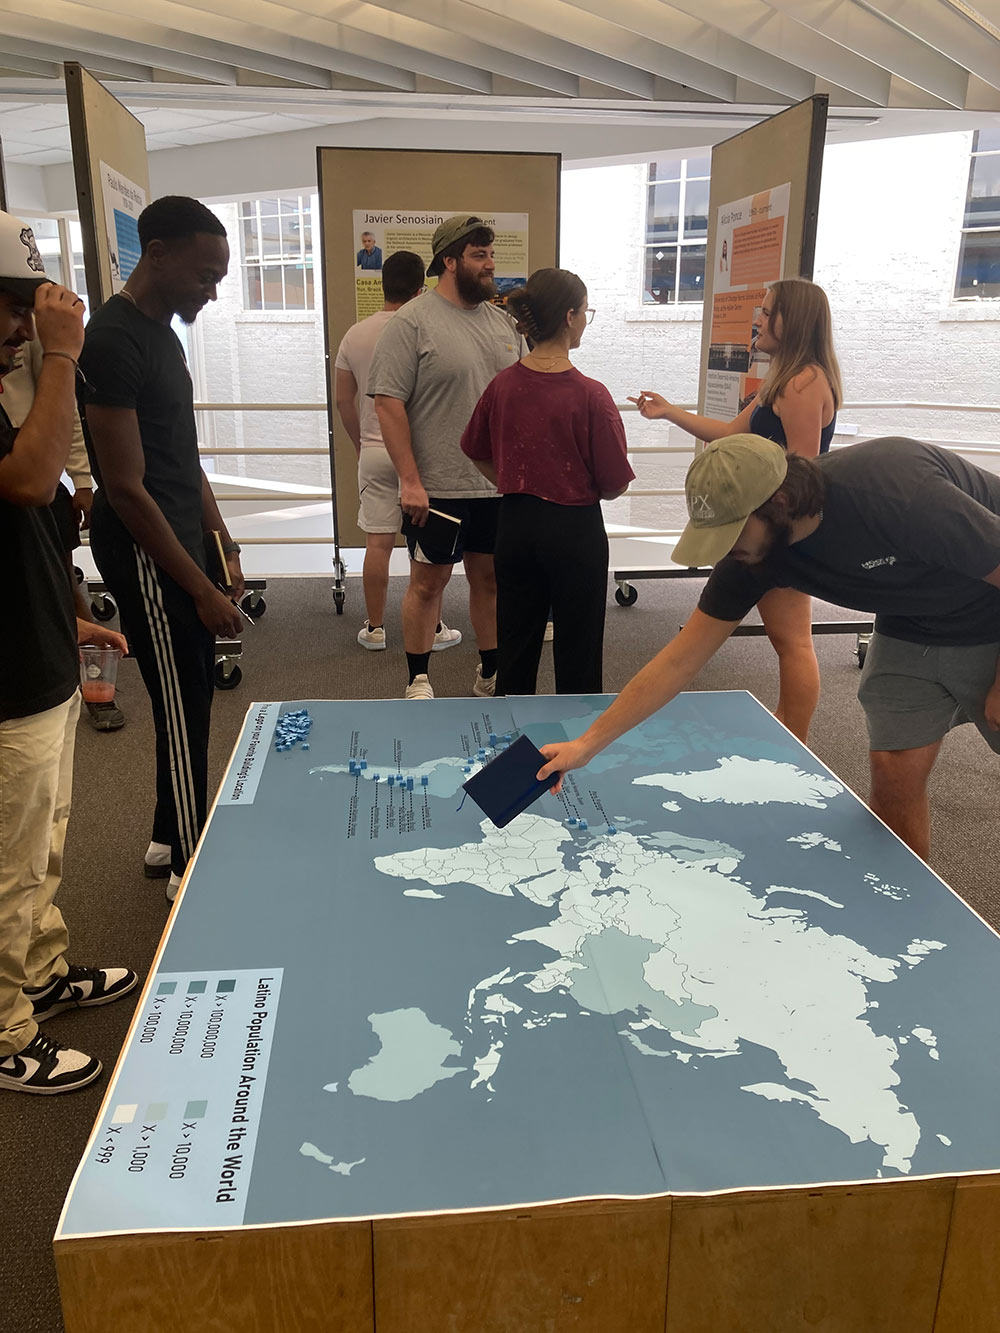 Groups of students interacting with a map and its pieces.